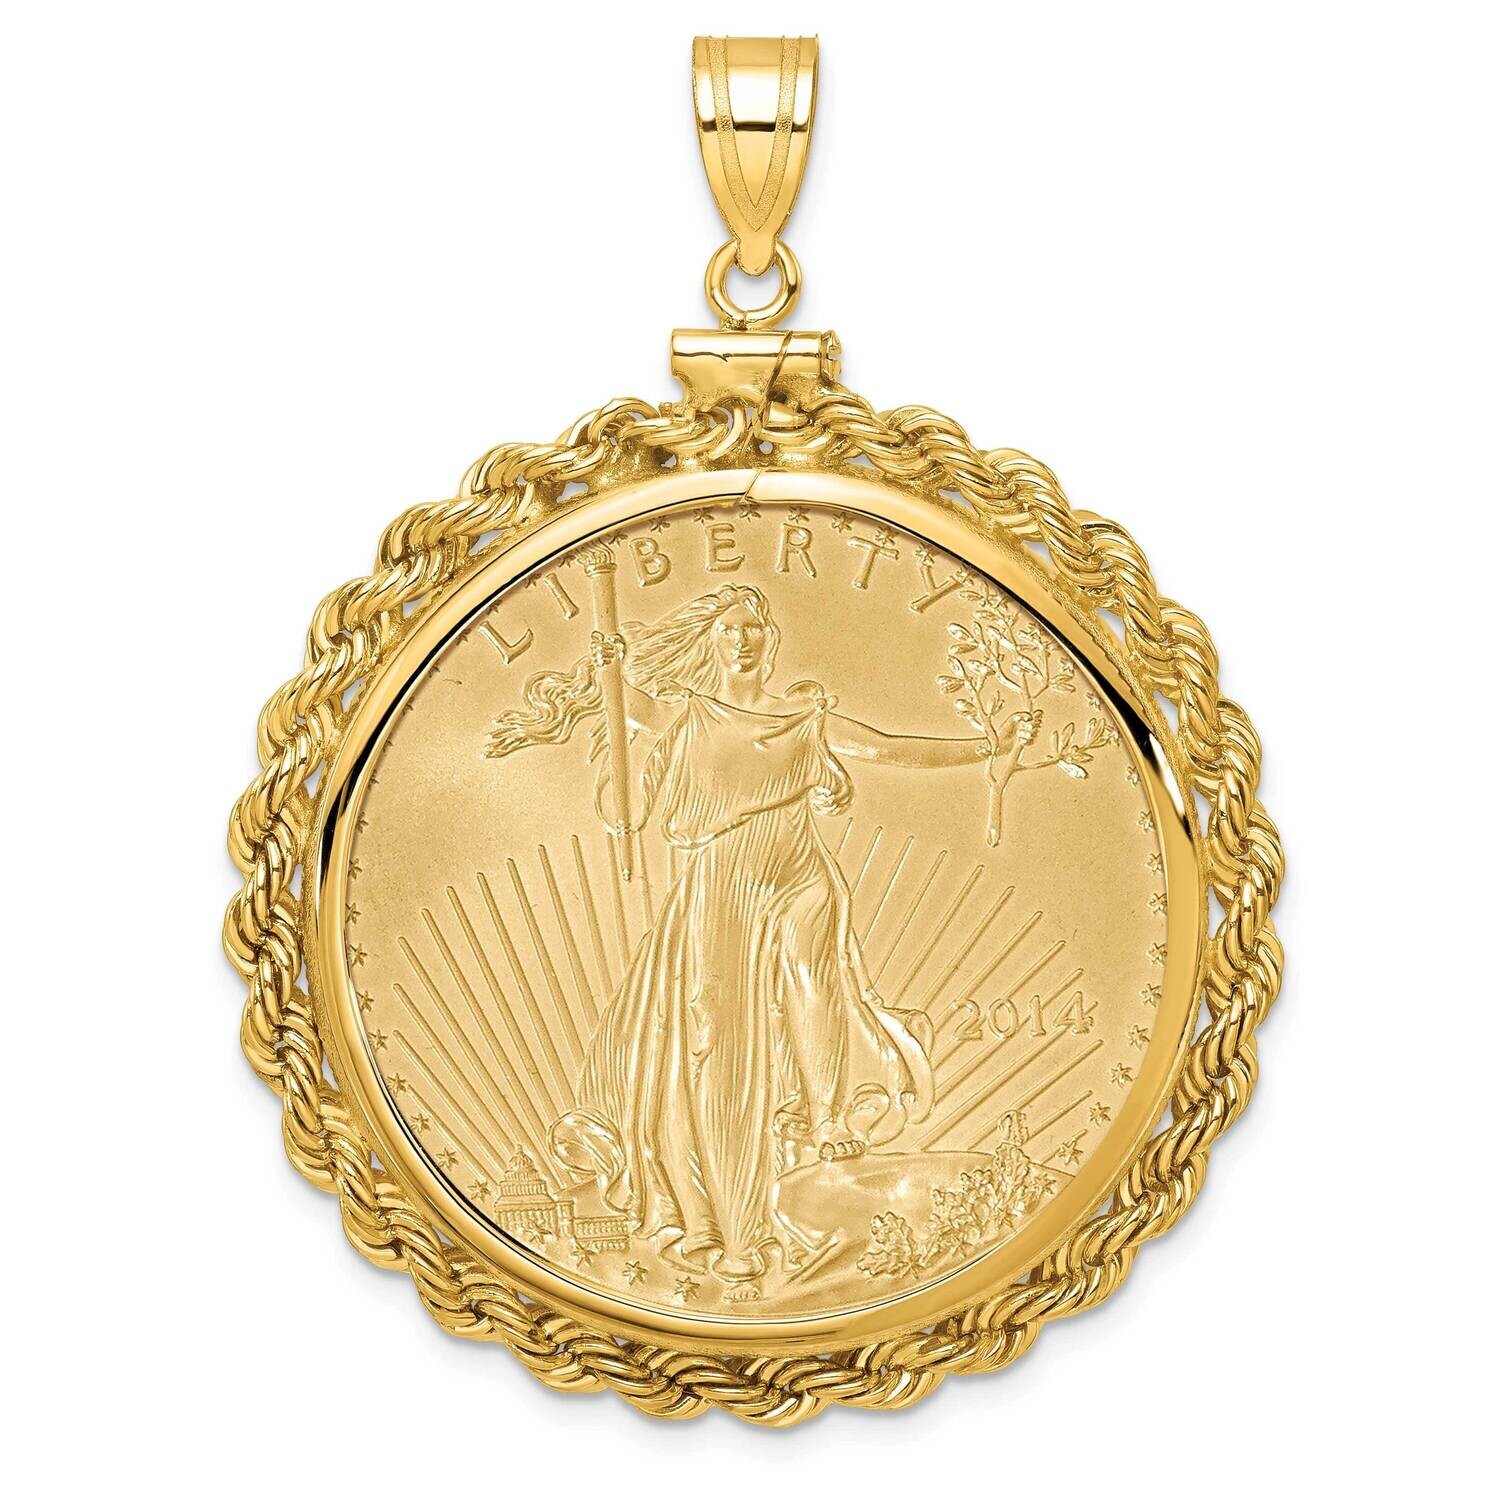 WidebDistinguished Coin Jewelry Rope Screw Top Mounted 1Oz American Eagle Coin Bezel Pendant 14k Gold C1215/32.7C